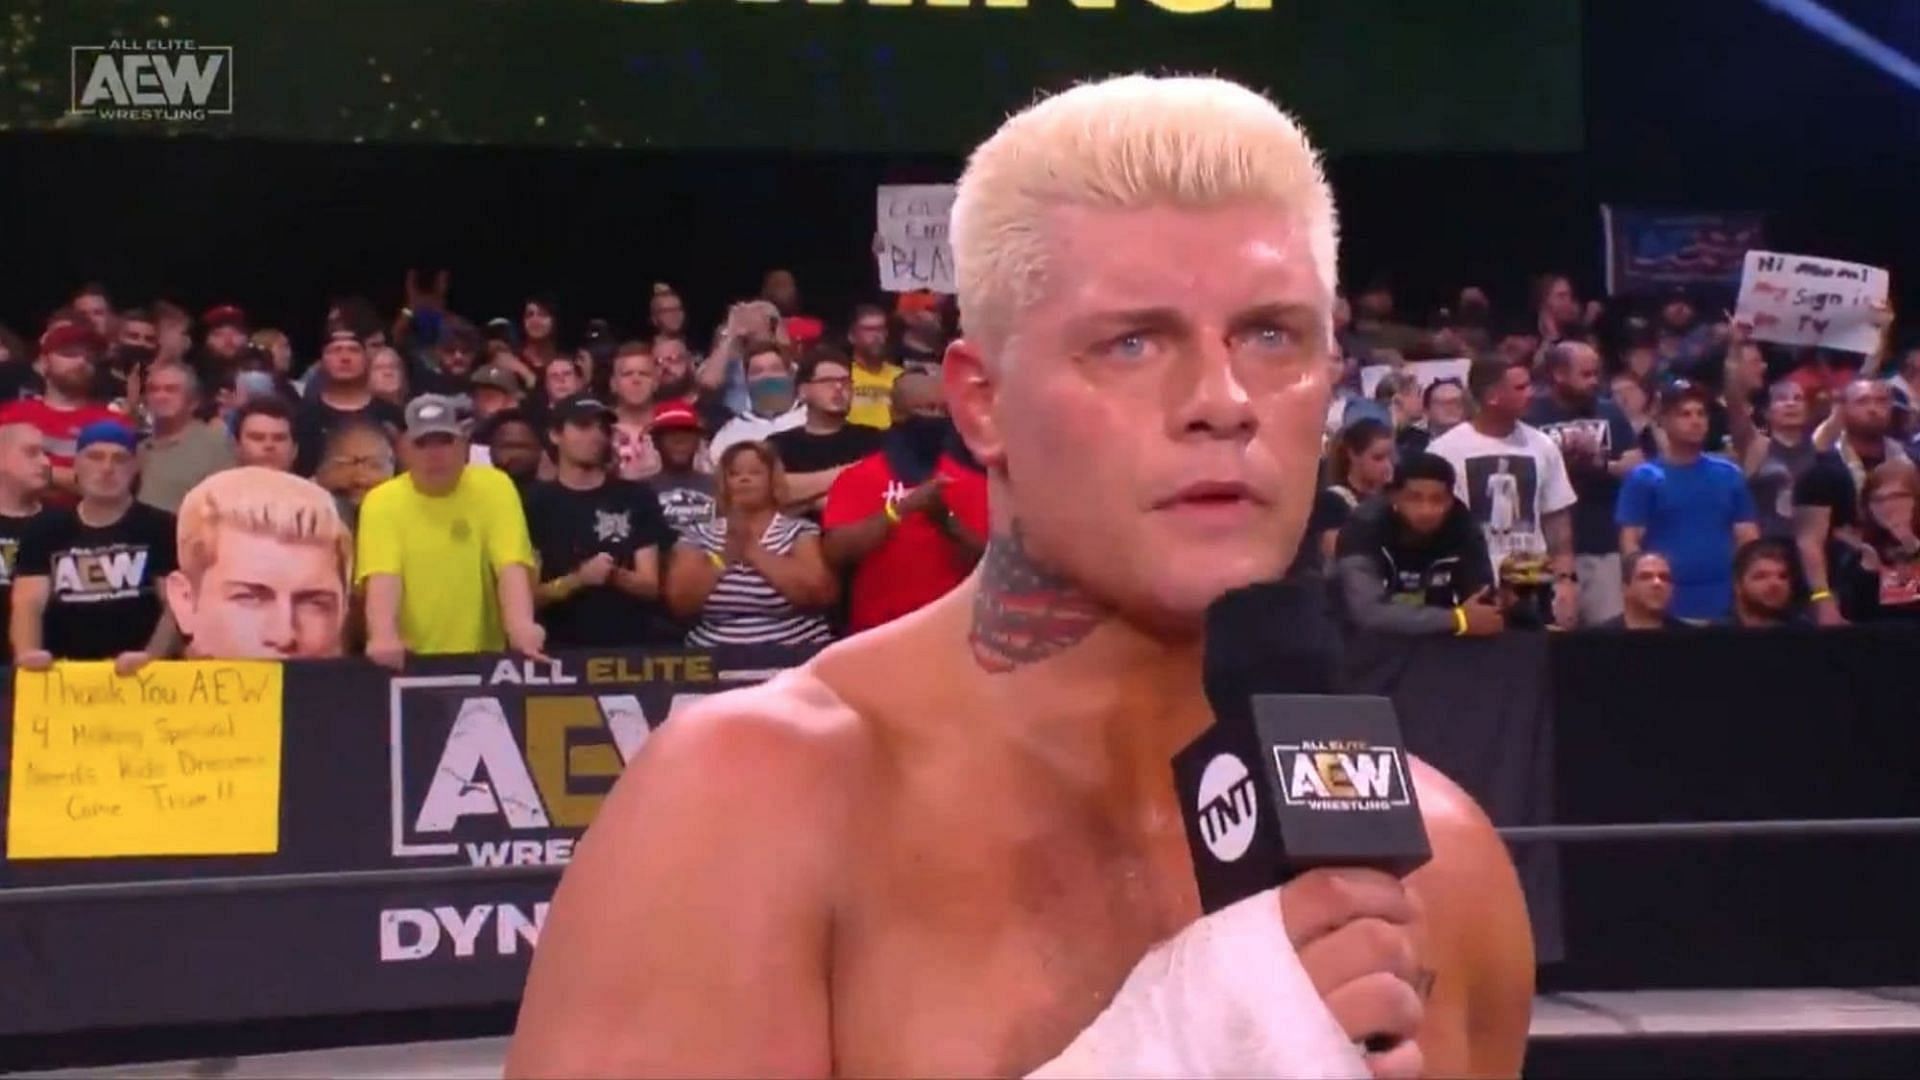 Some fans are booing the very popular Cody Rhodes. Here is some advice from a &quot;Dream.&quot;